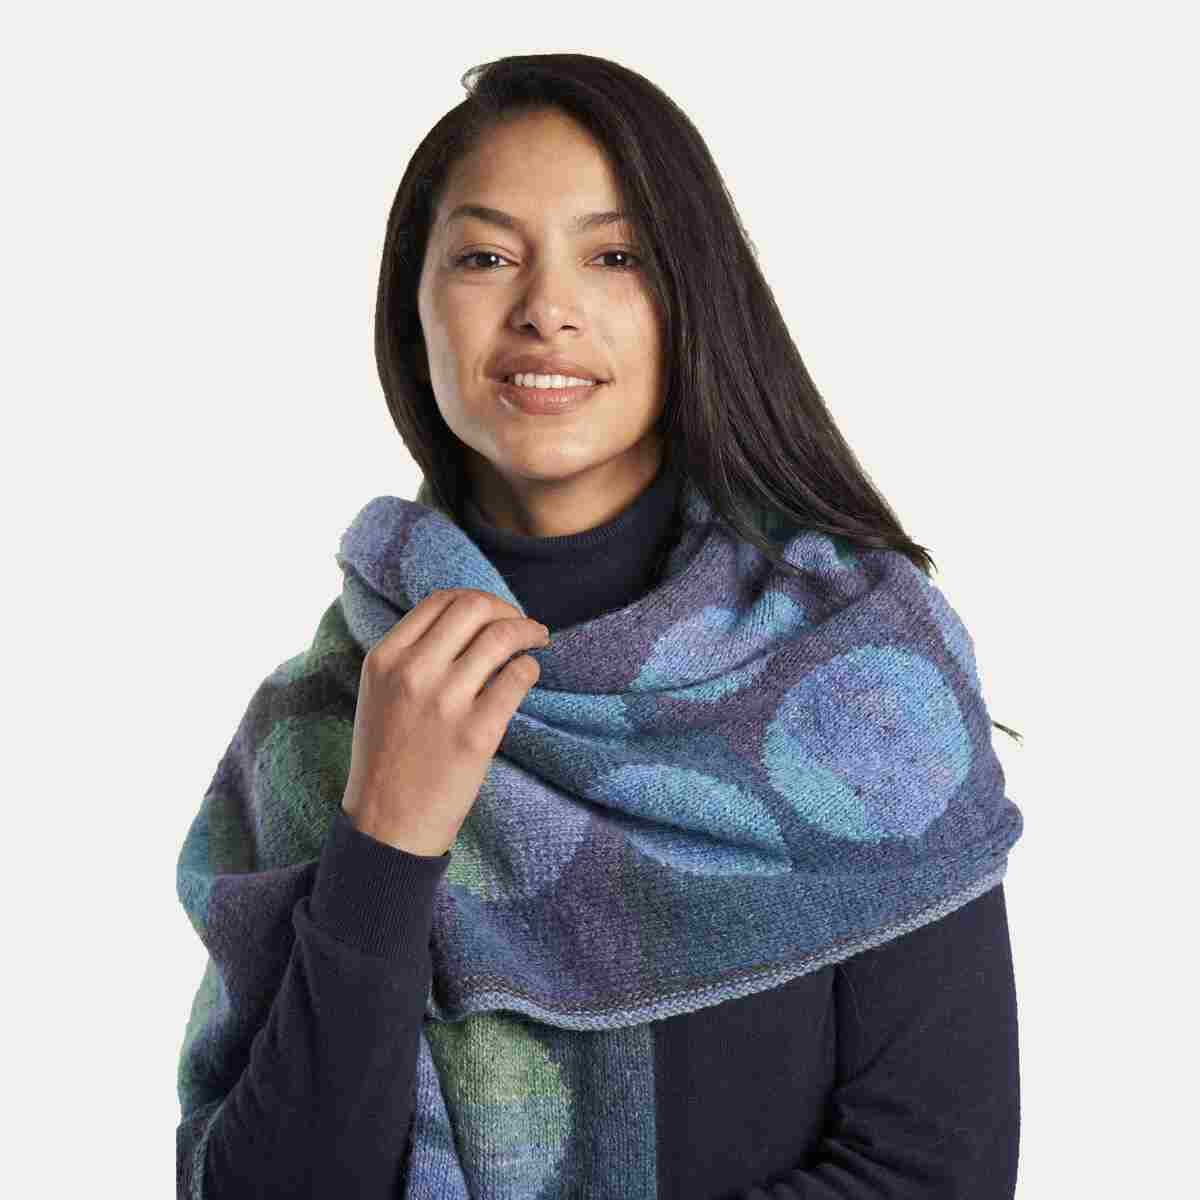 Kaffe fassett Marble wrap kit Woman with dark hair wearing wrap with large polka dots in gradient yarn